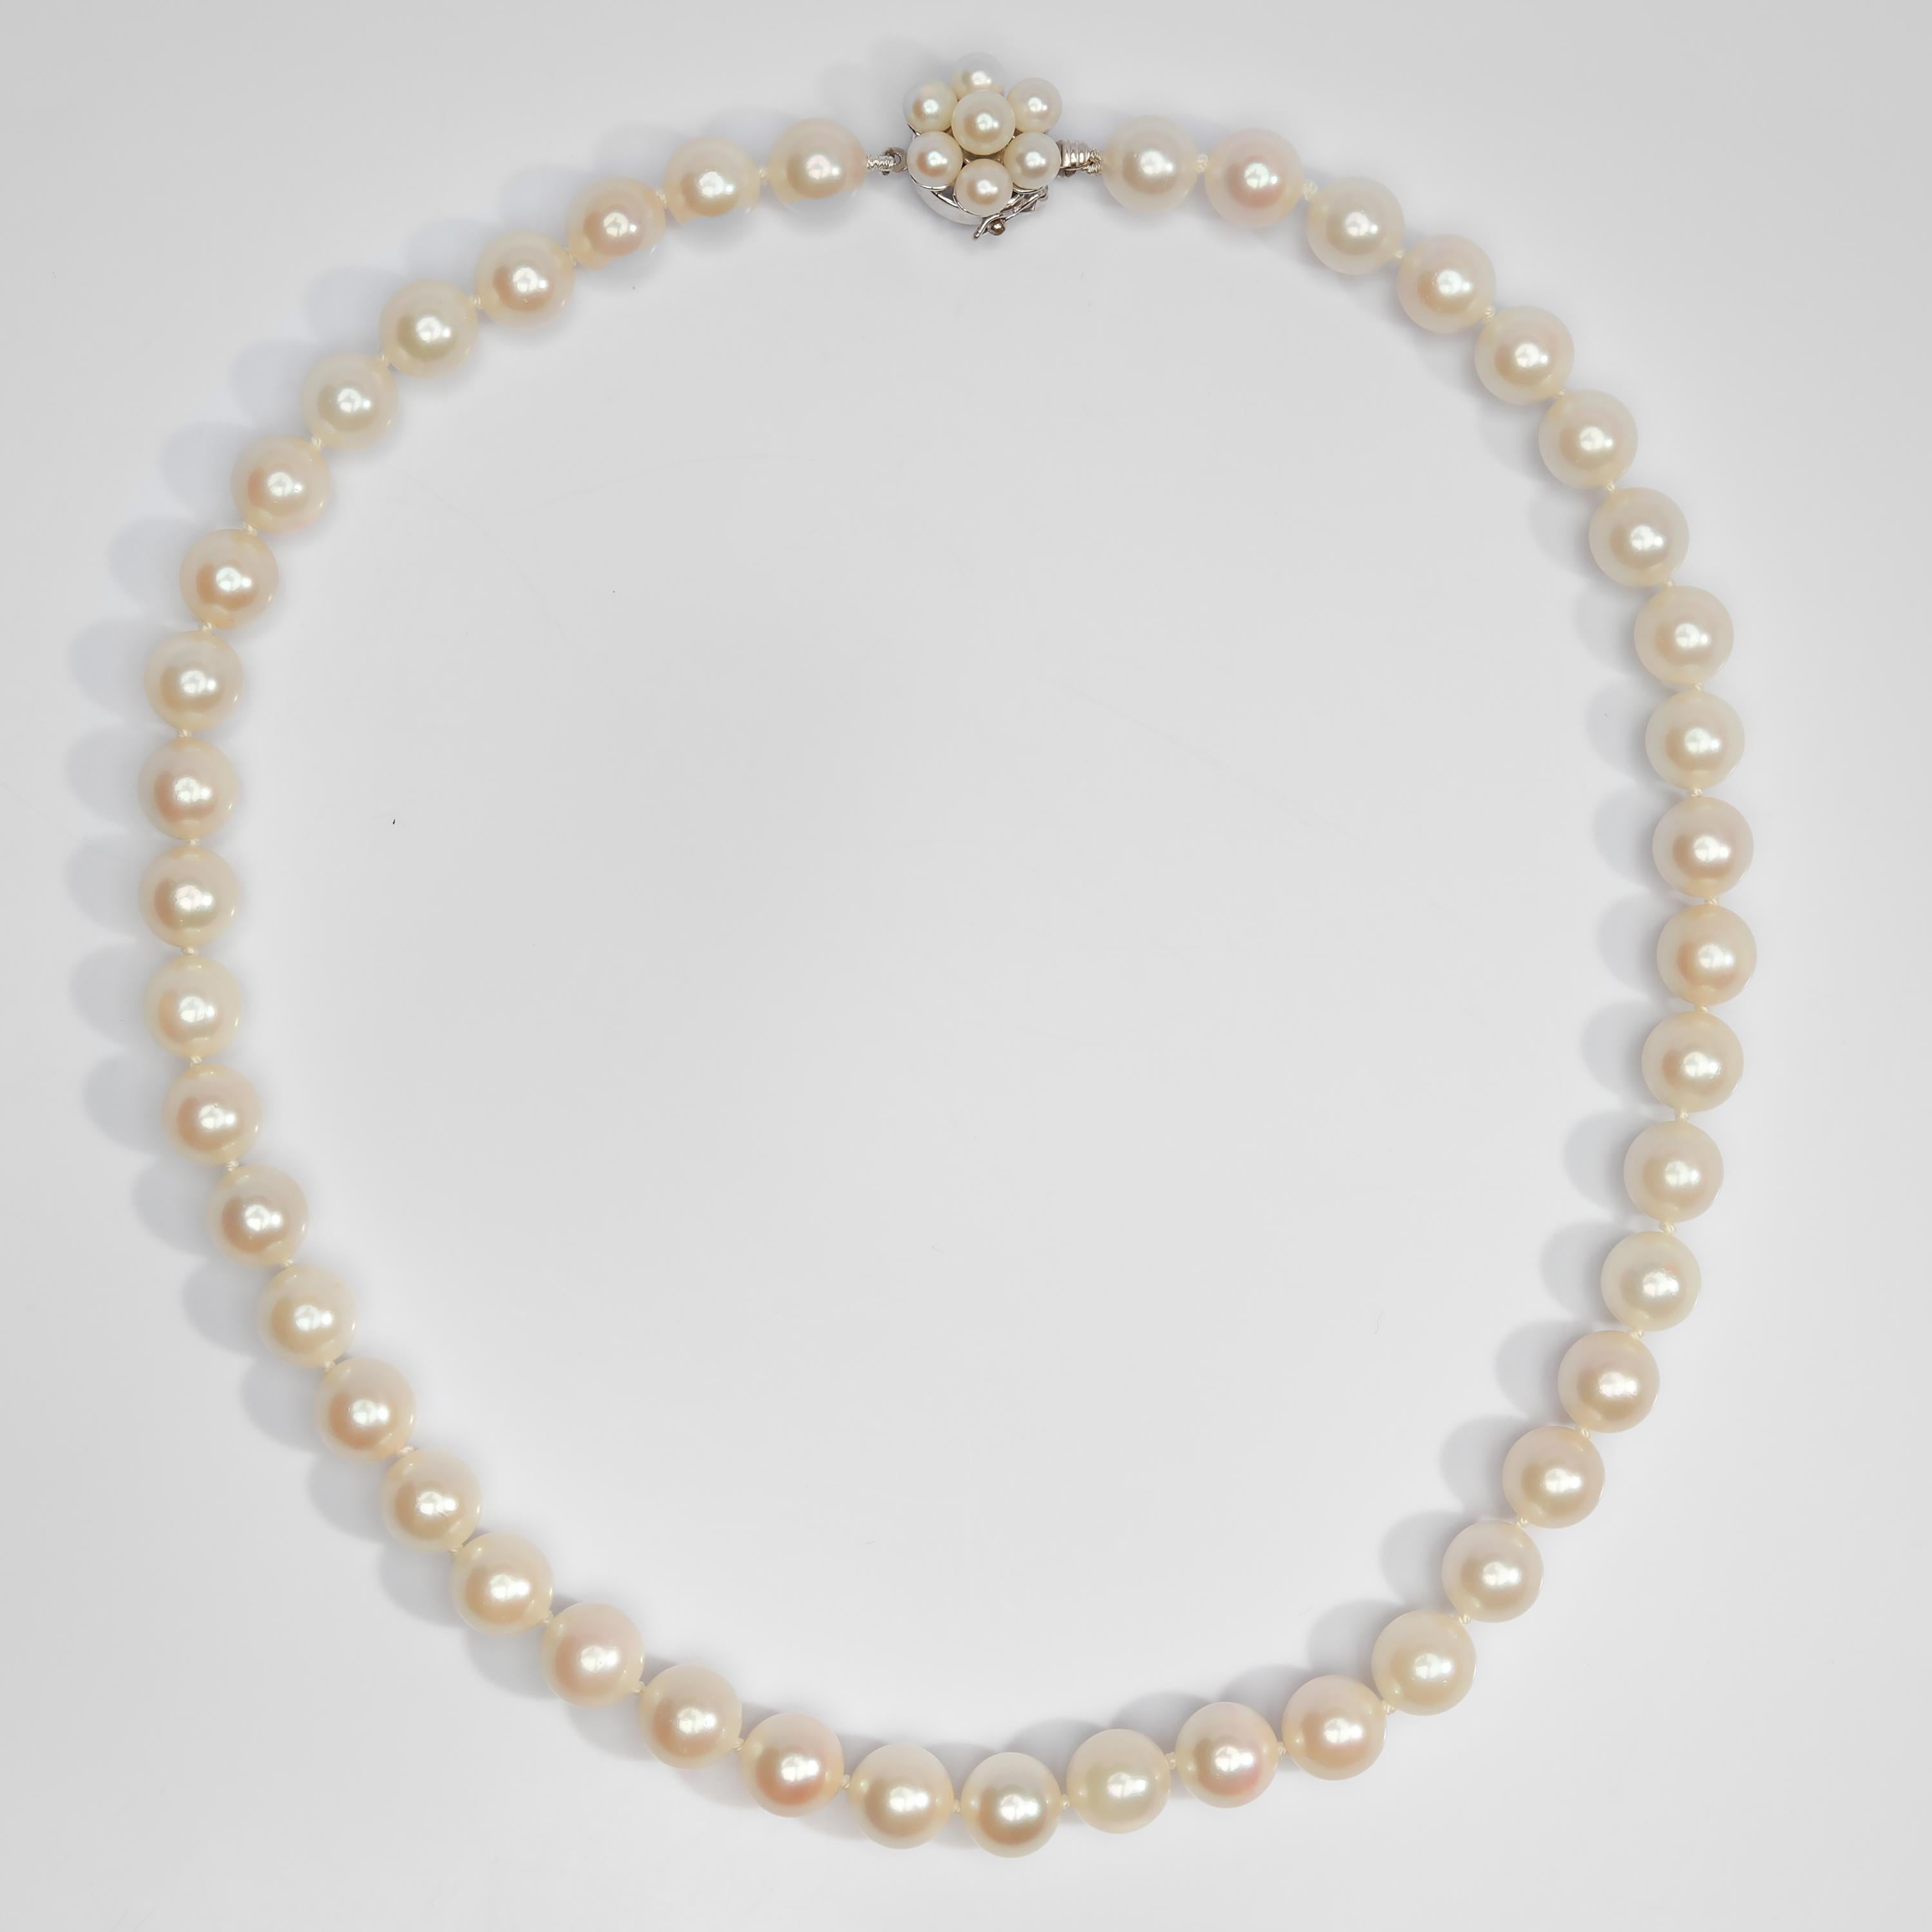 When it comes to cultured Akoya pearls, 